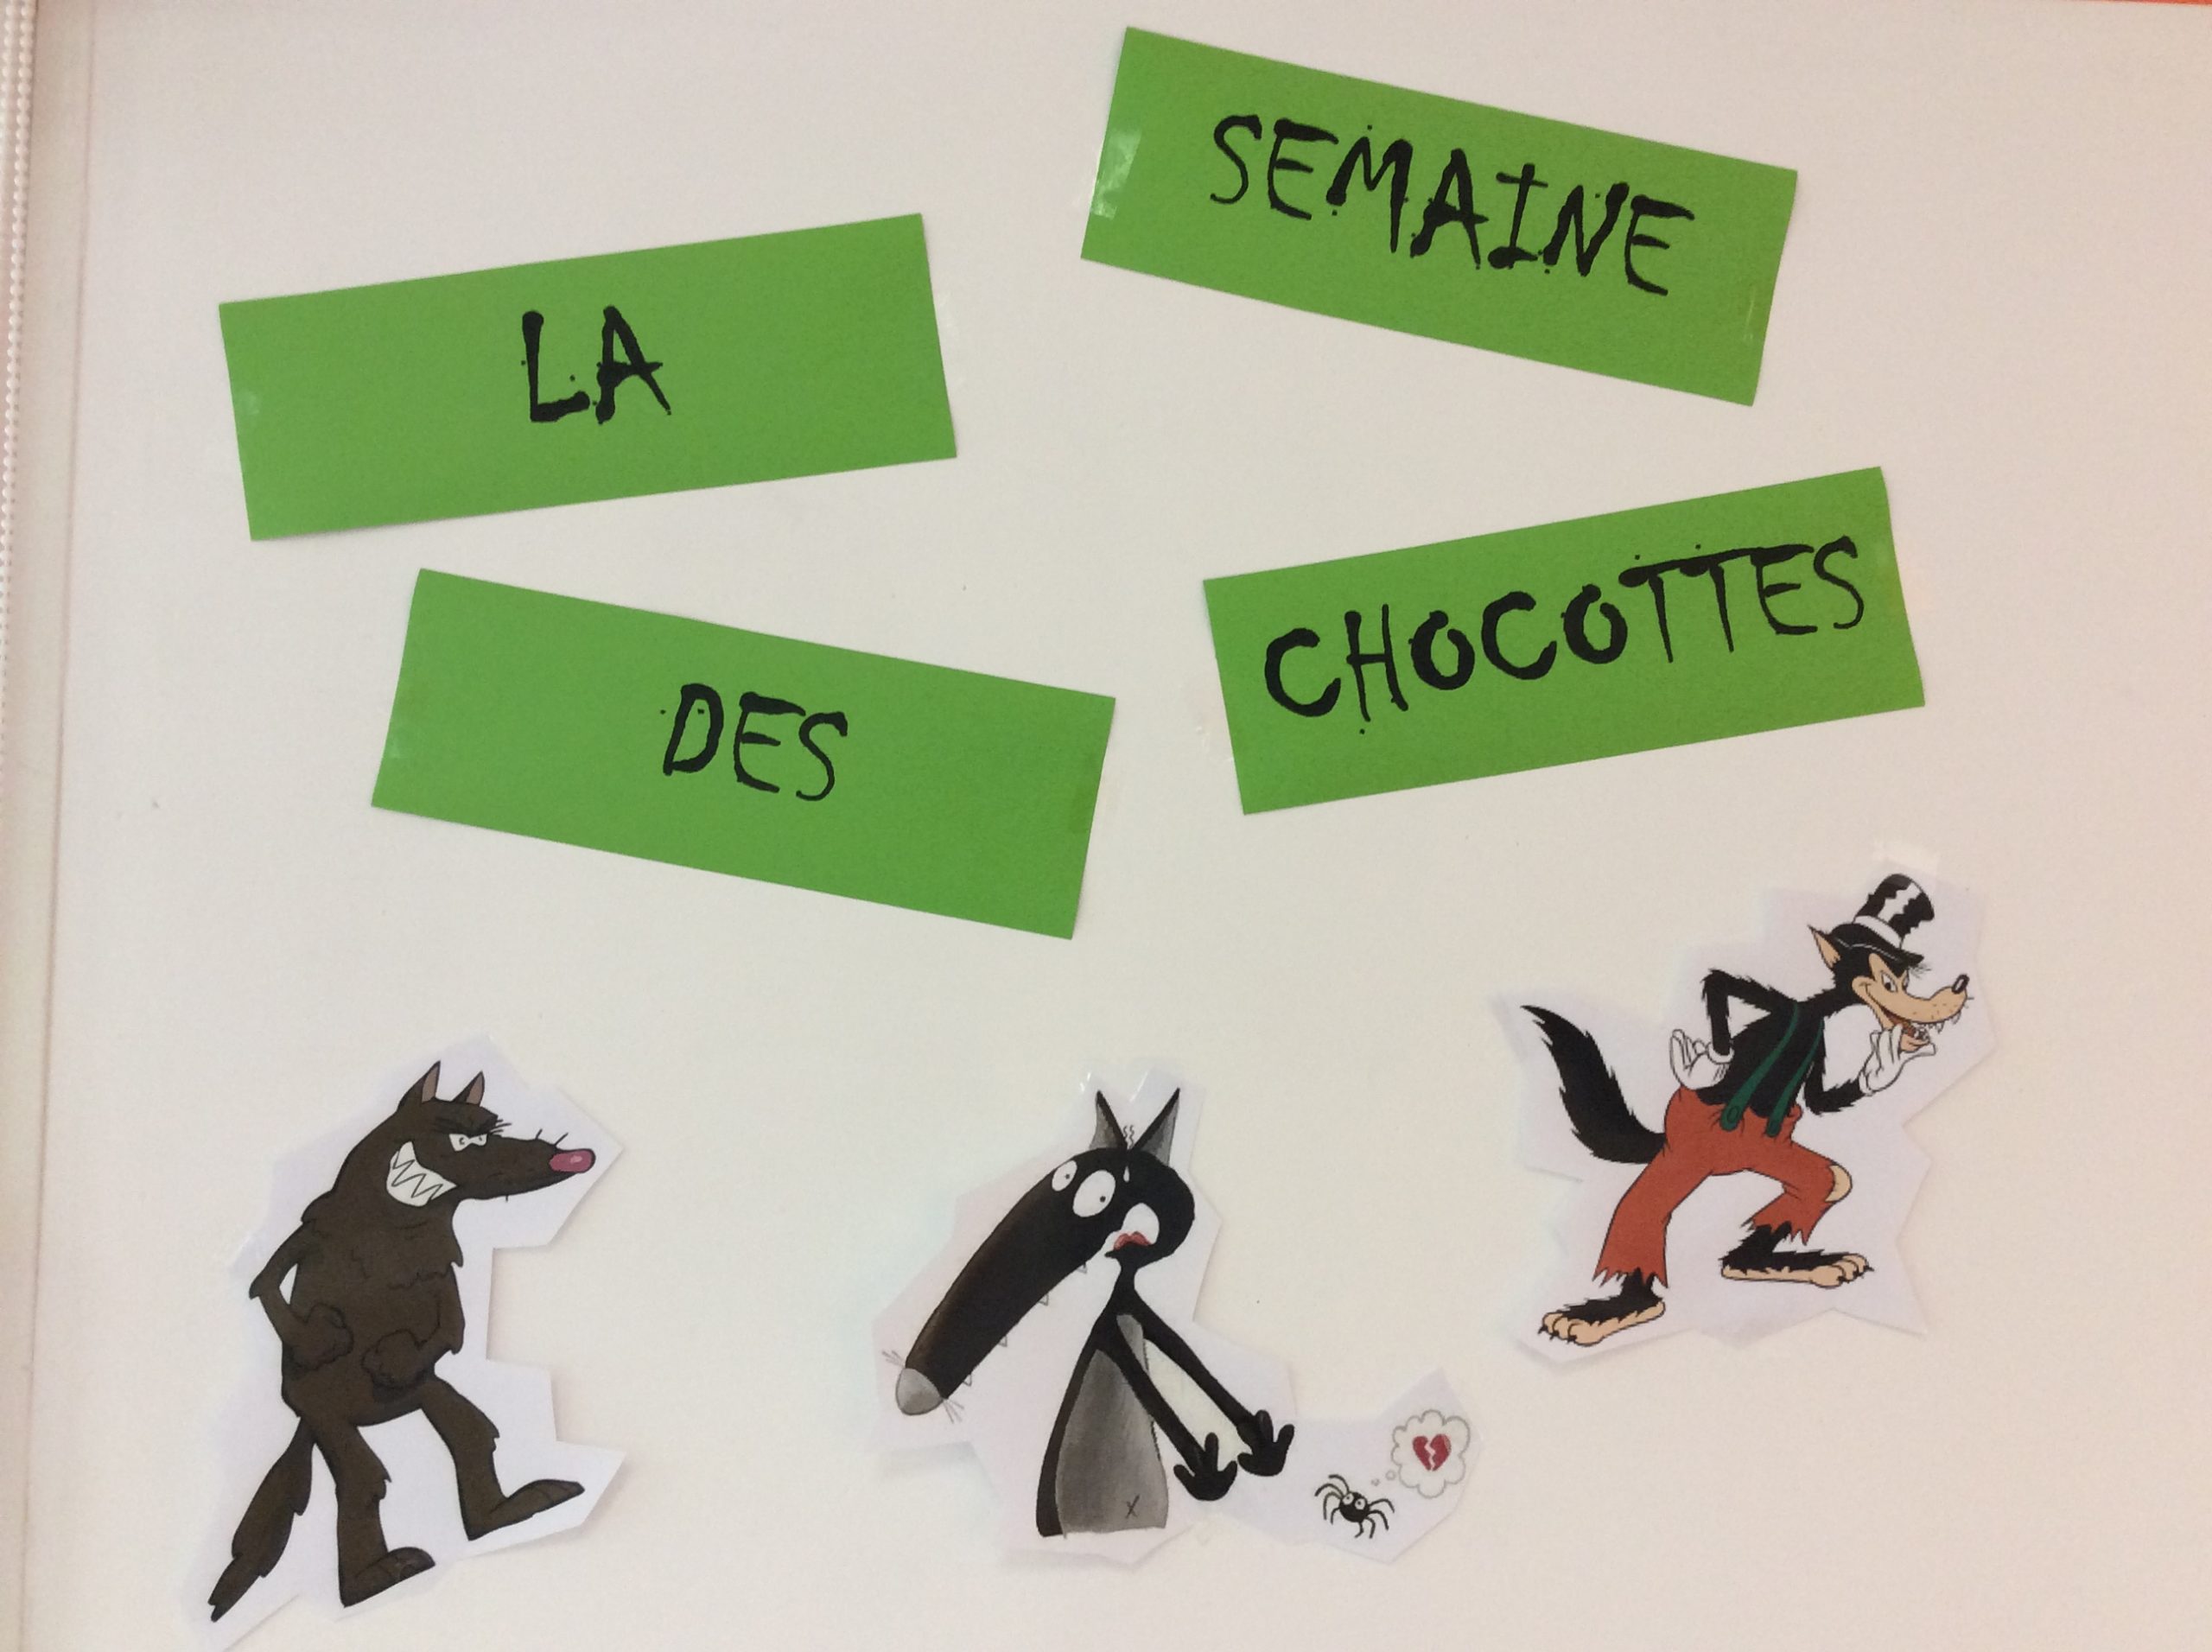 You are currently viewing La semaine des chocottes en maternelle!!!